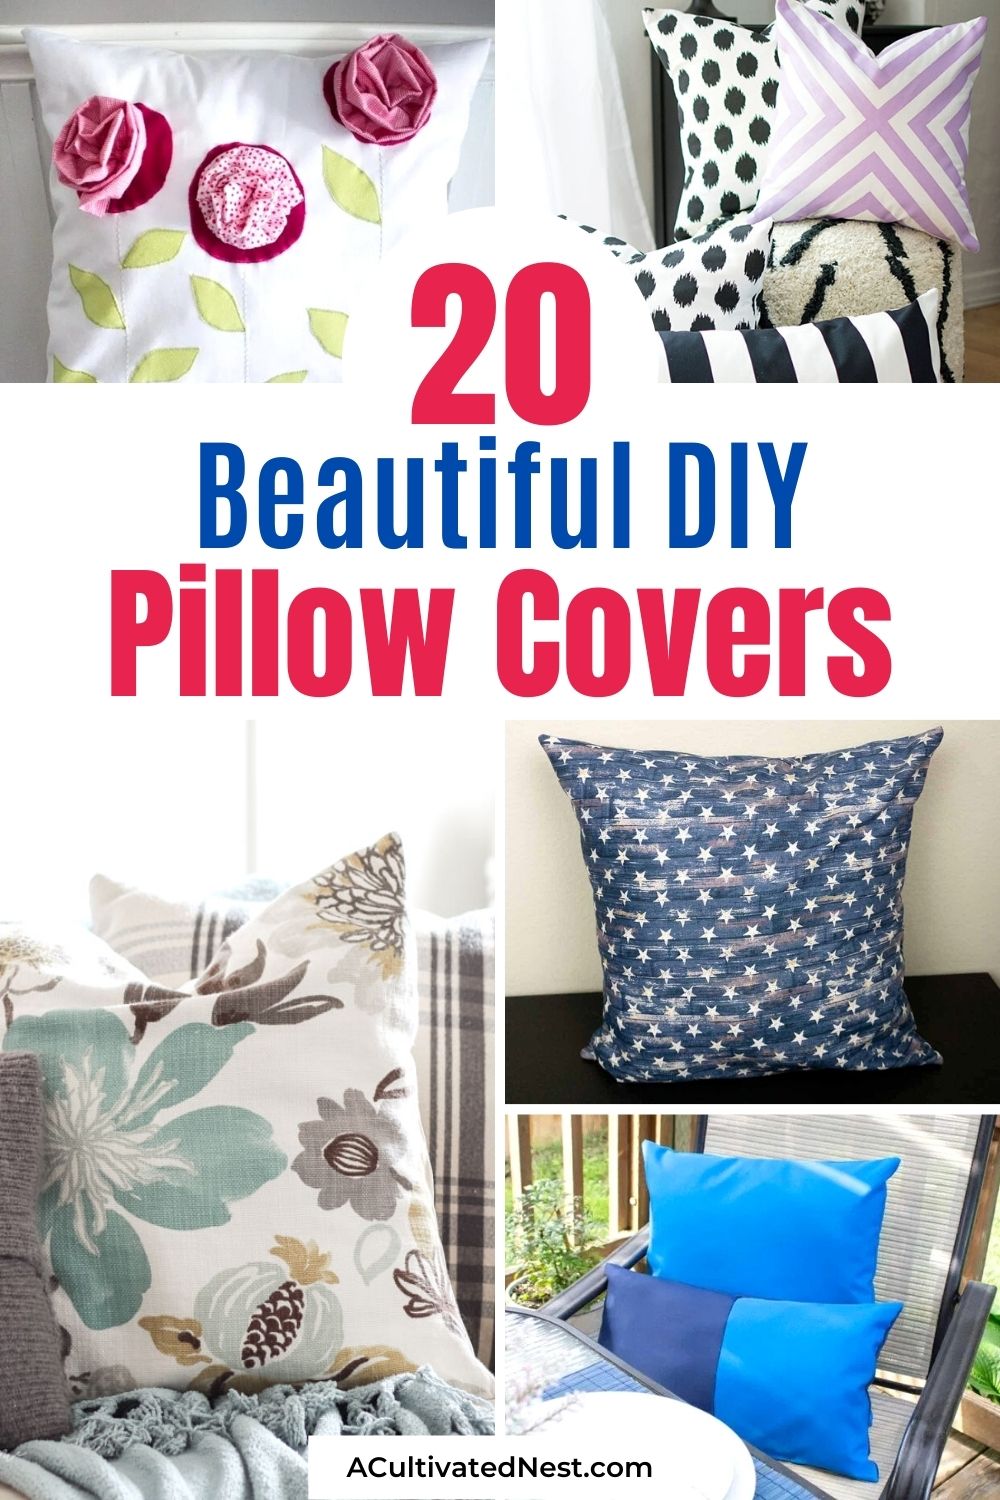 20 Easy DIY Pillow Covers- You can easily update your home's décor on a budget with these DIY pillow covers! There are so many beautiful homemade pillow case ideas here to inspire you! | no-sew pillow case projects, #diys #diyProject #diyPillowCovers #crafts #ACultivatedNest